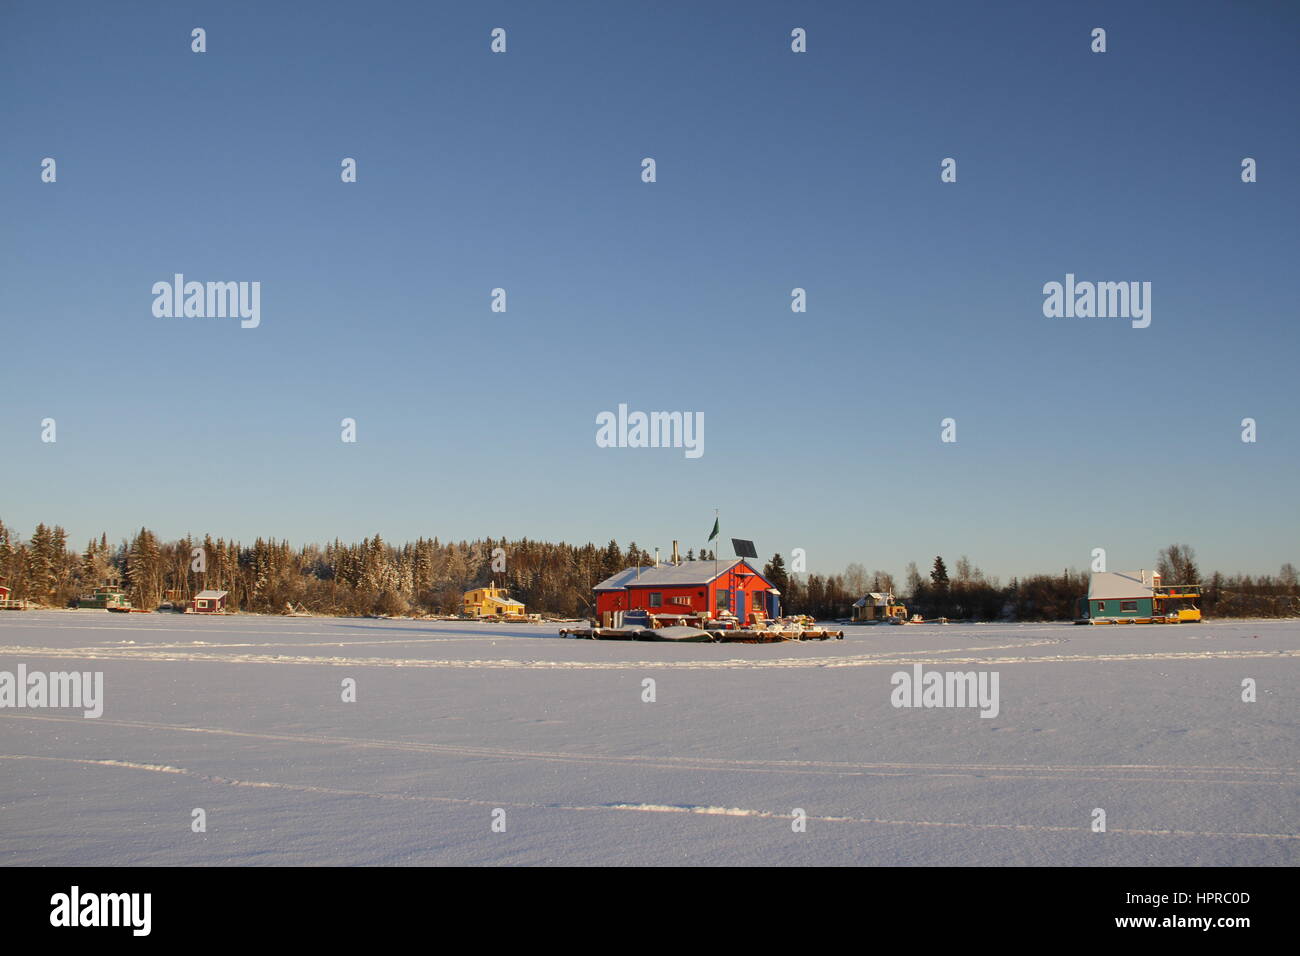 Several houseboats on Yellowknife Bay in Great Slave Lake with a red houseboat in the middle of the frame Stock Photo